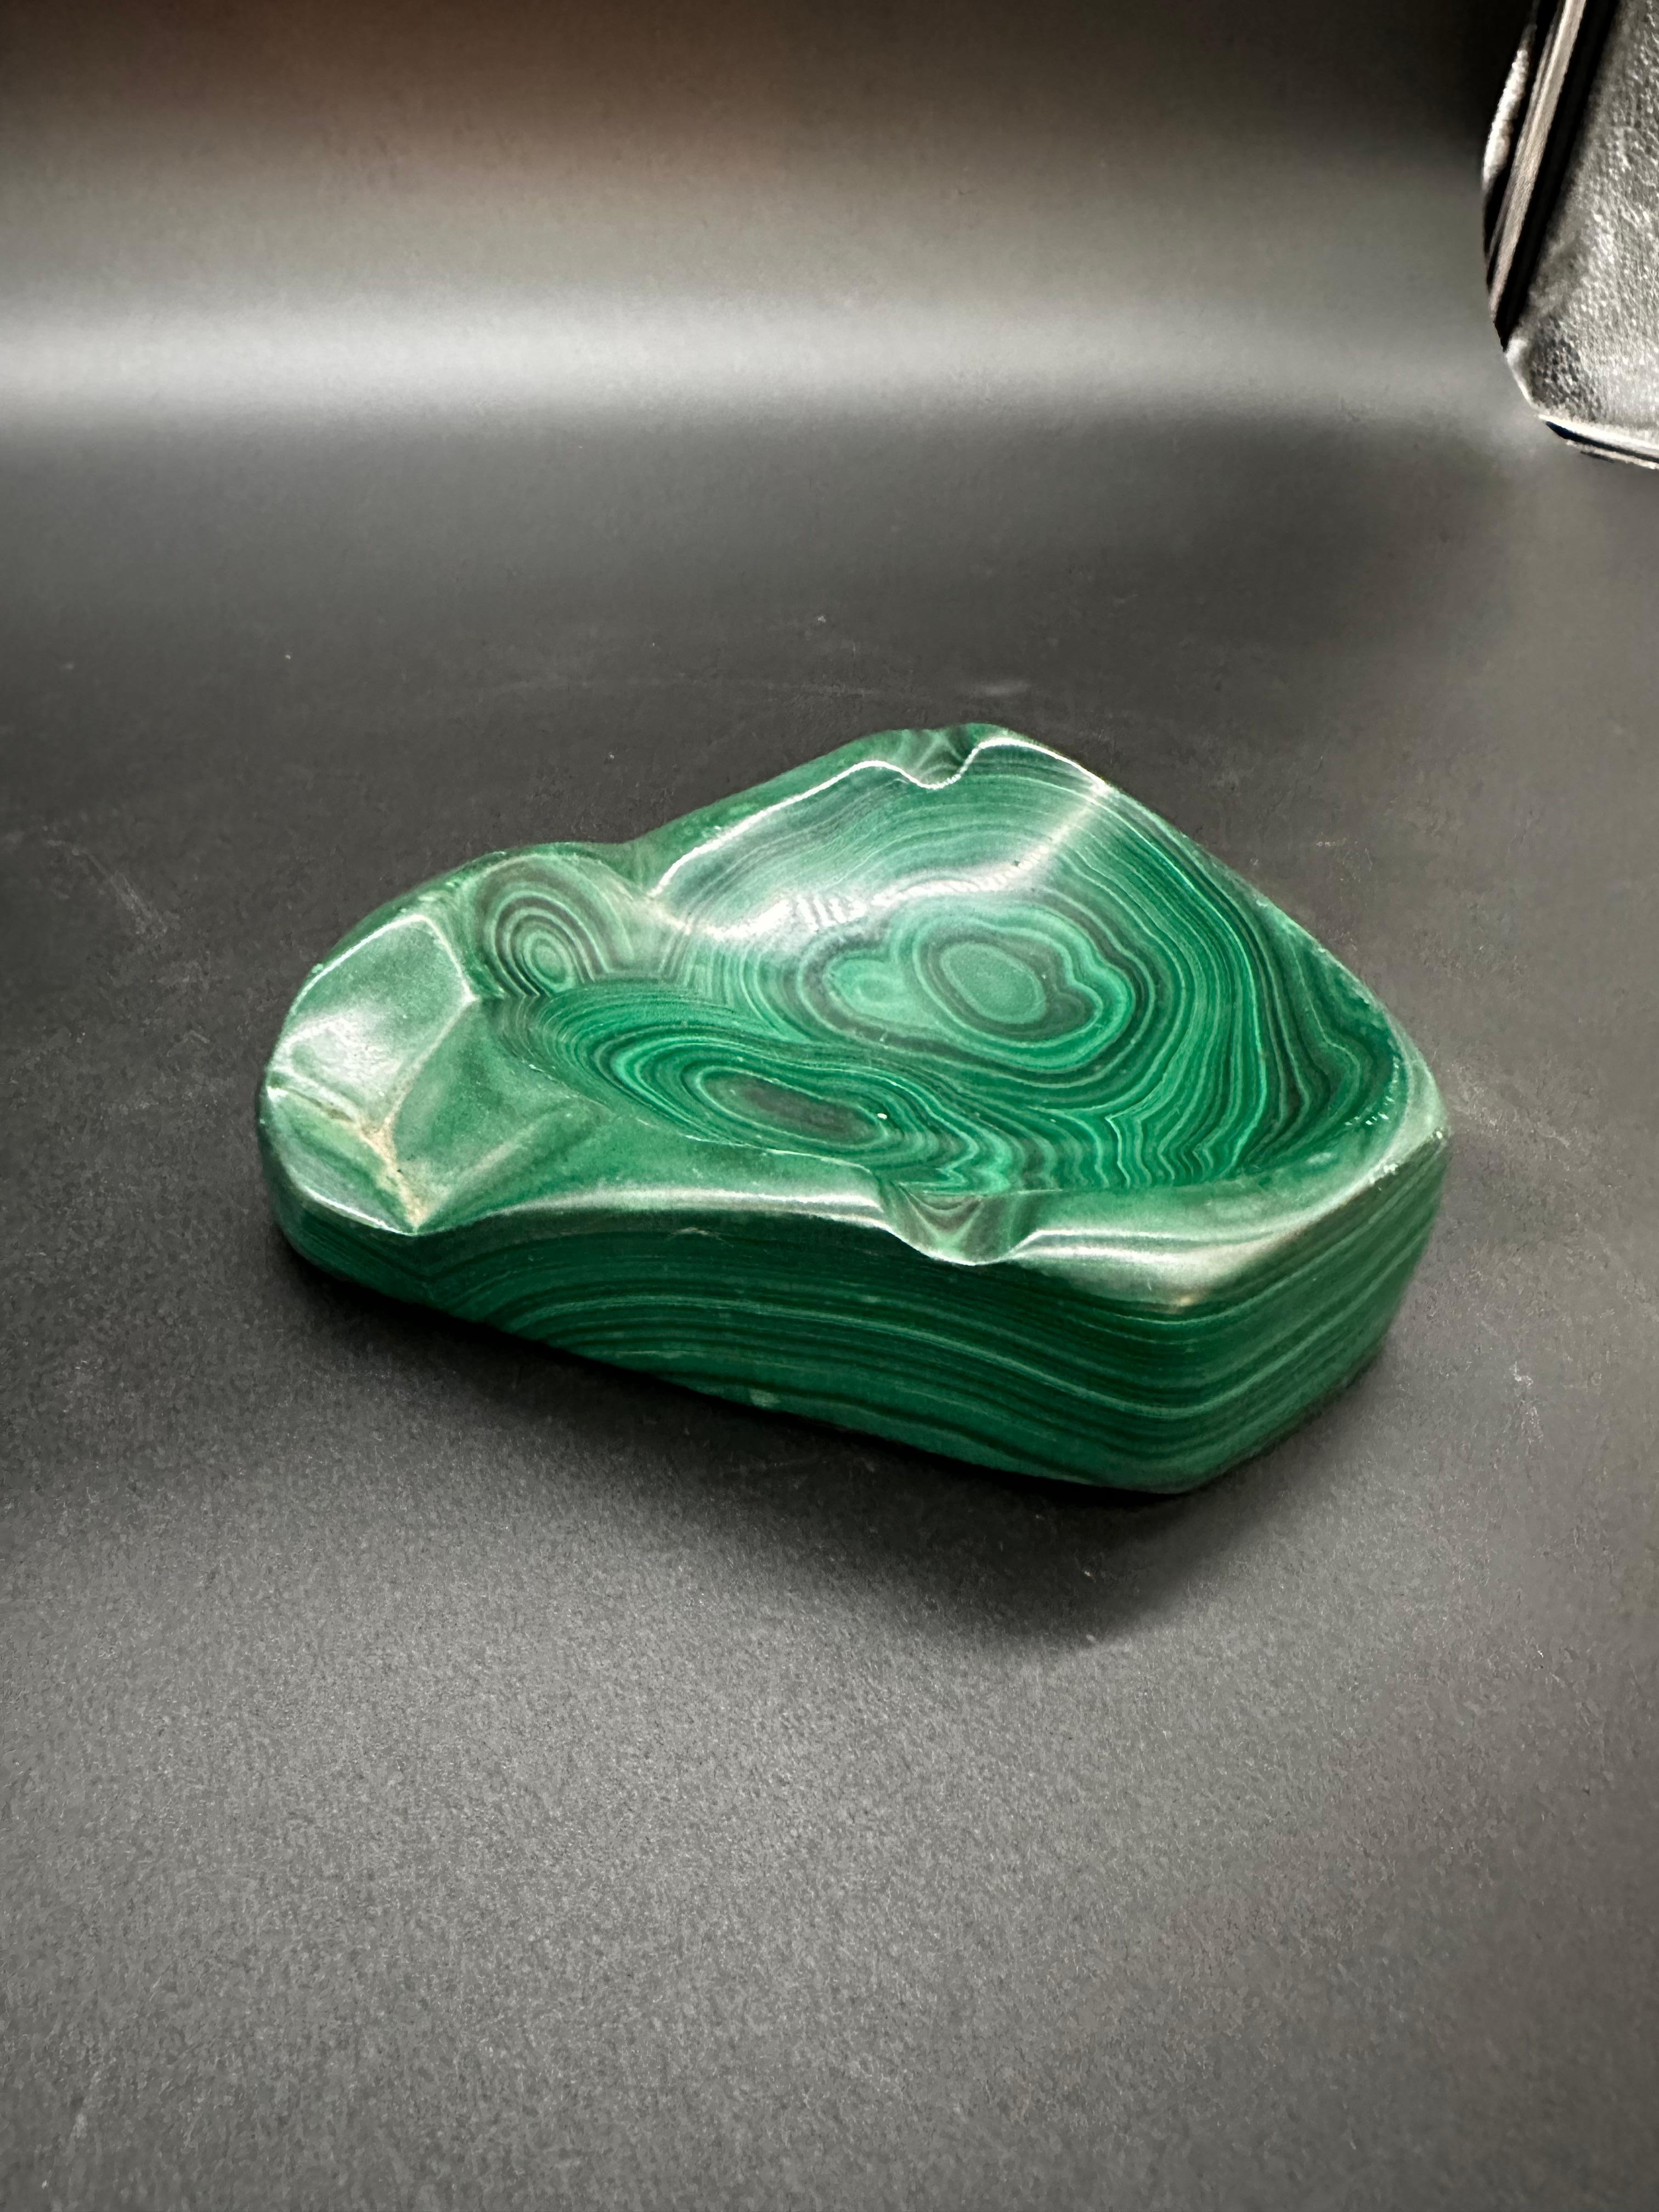 A vintage Italian Malachite ashtray from the 1960s is a small, decorative dish crafted from malachite stone in Italy during the 1960s. It likely features vibrant green hues characteristic of malachite, with a sleek and elegant design typical of the